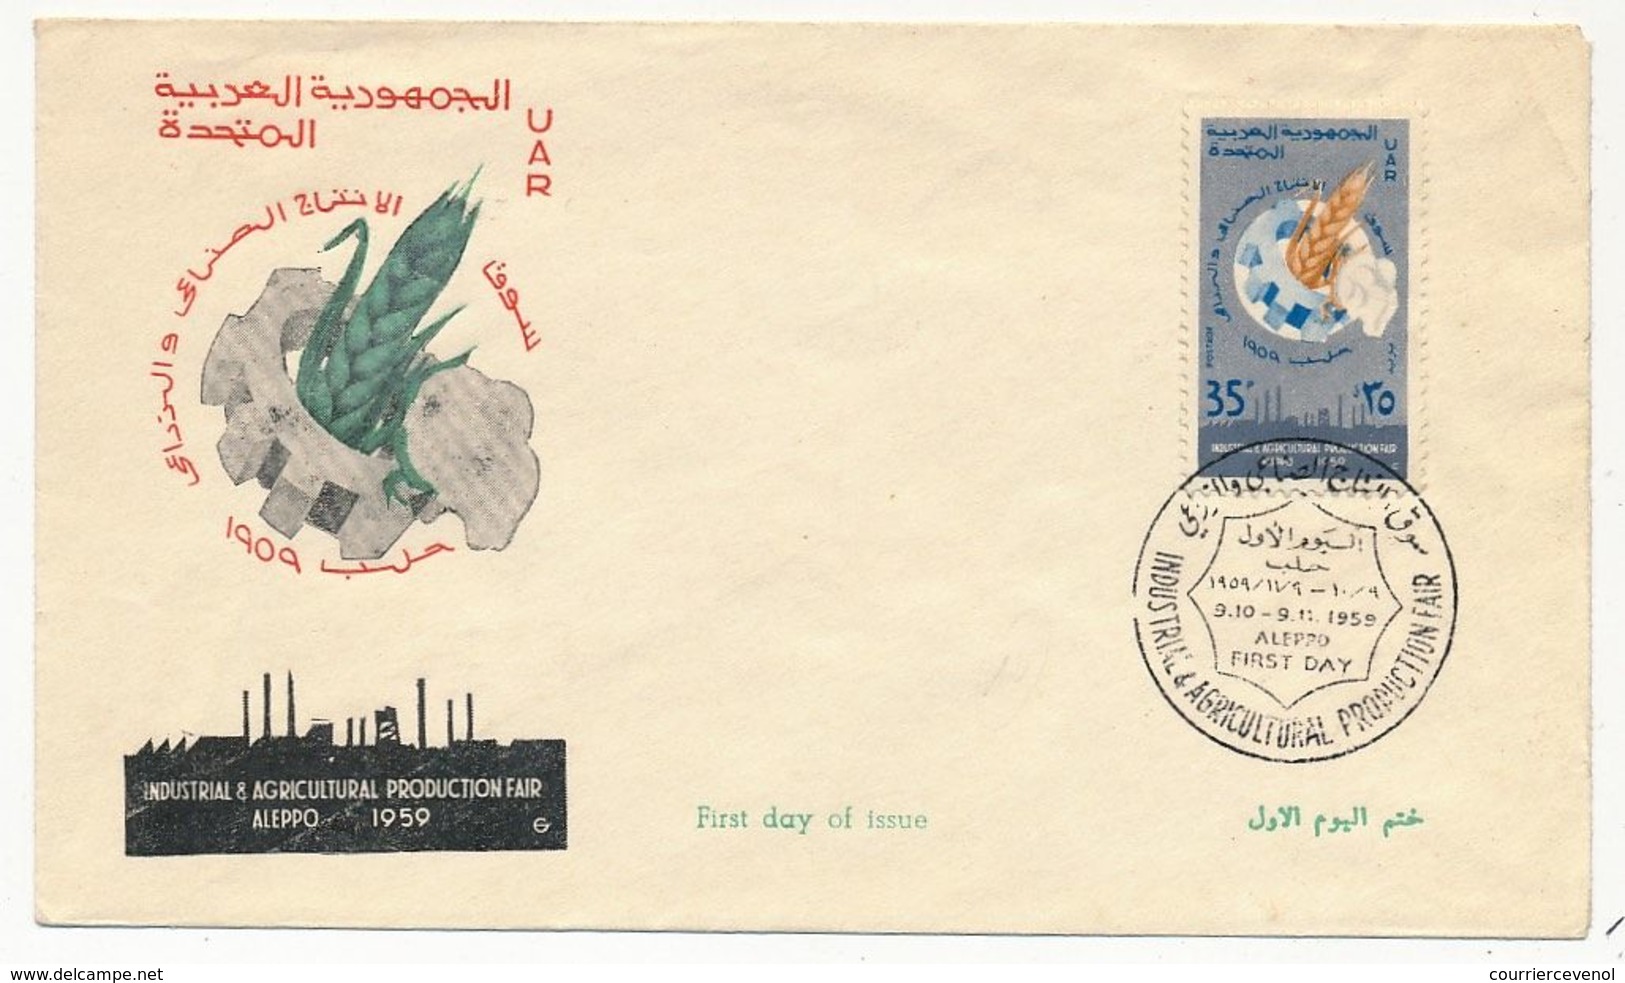 EGYPTE UAR - FDC - Industrial & Agricultural Fair 1959 - Le Caire - 9/11/1959 - Covers & Documents